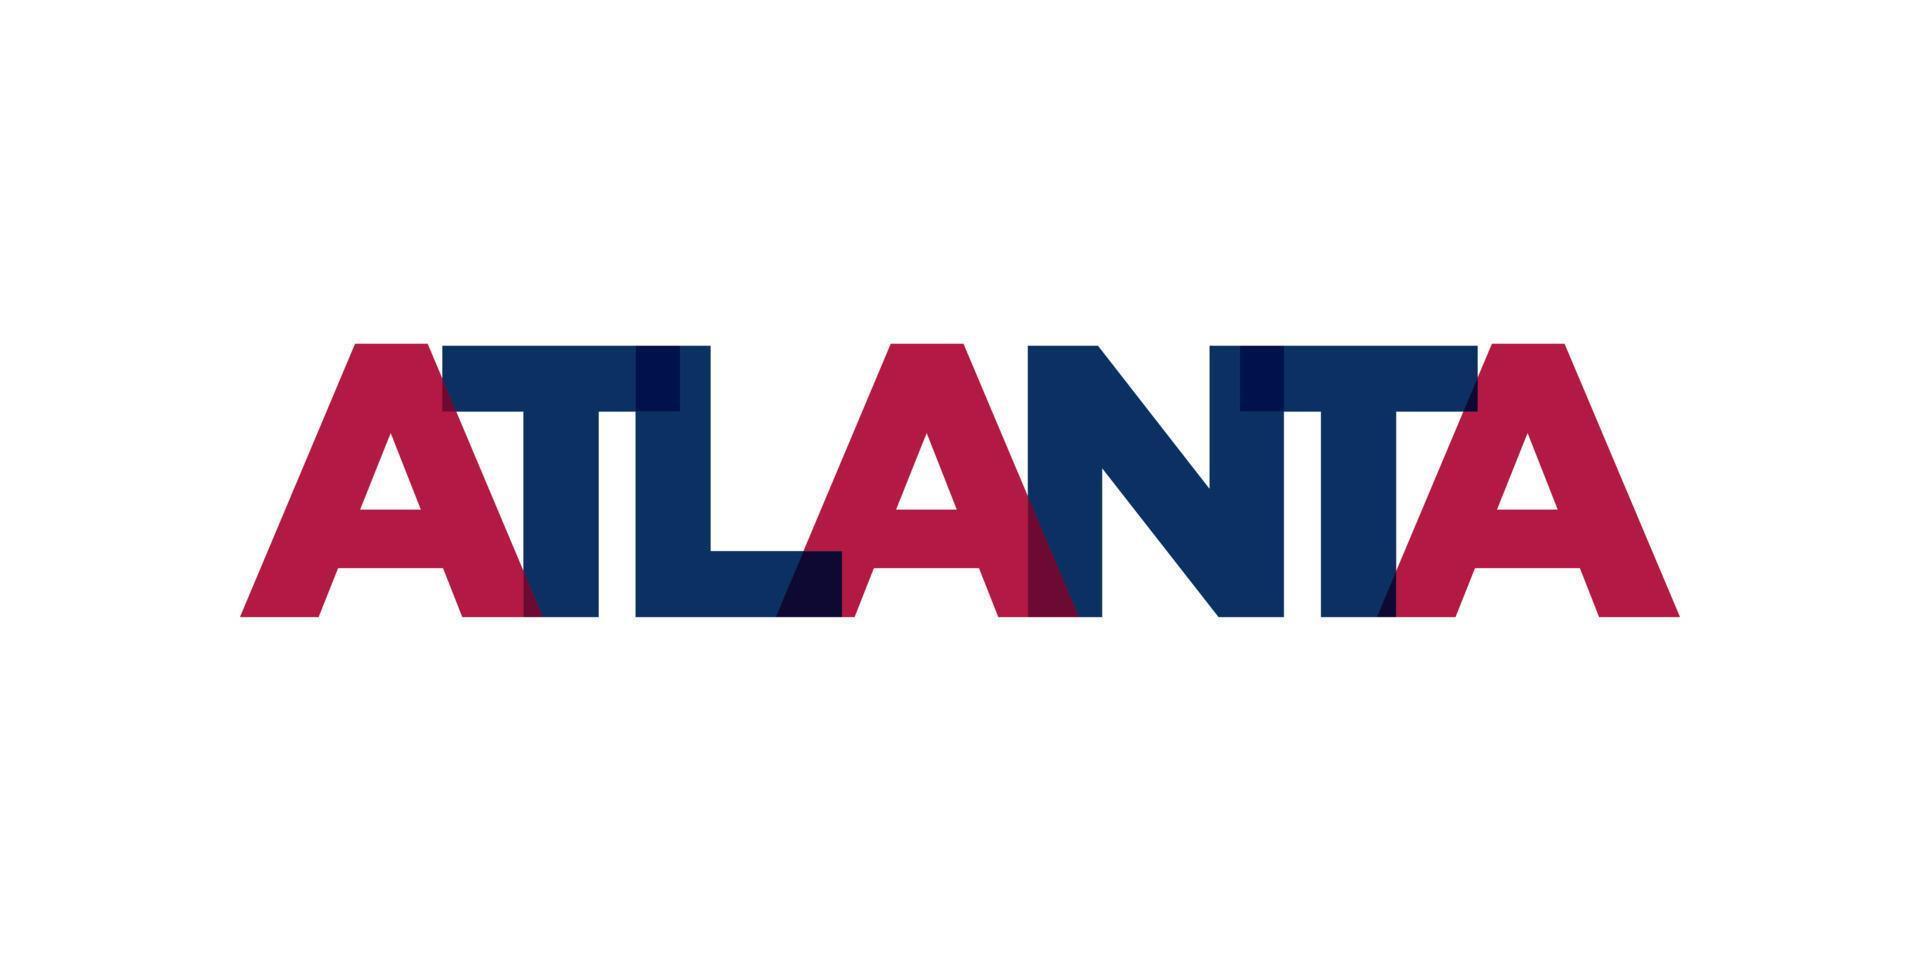 Atlanta, Georgia, USA typography slogan design. America logo with graphic city lettering for print and web. vector